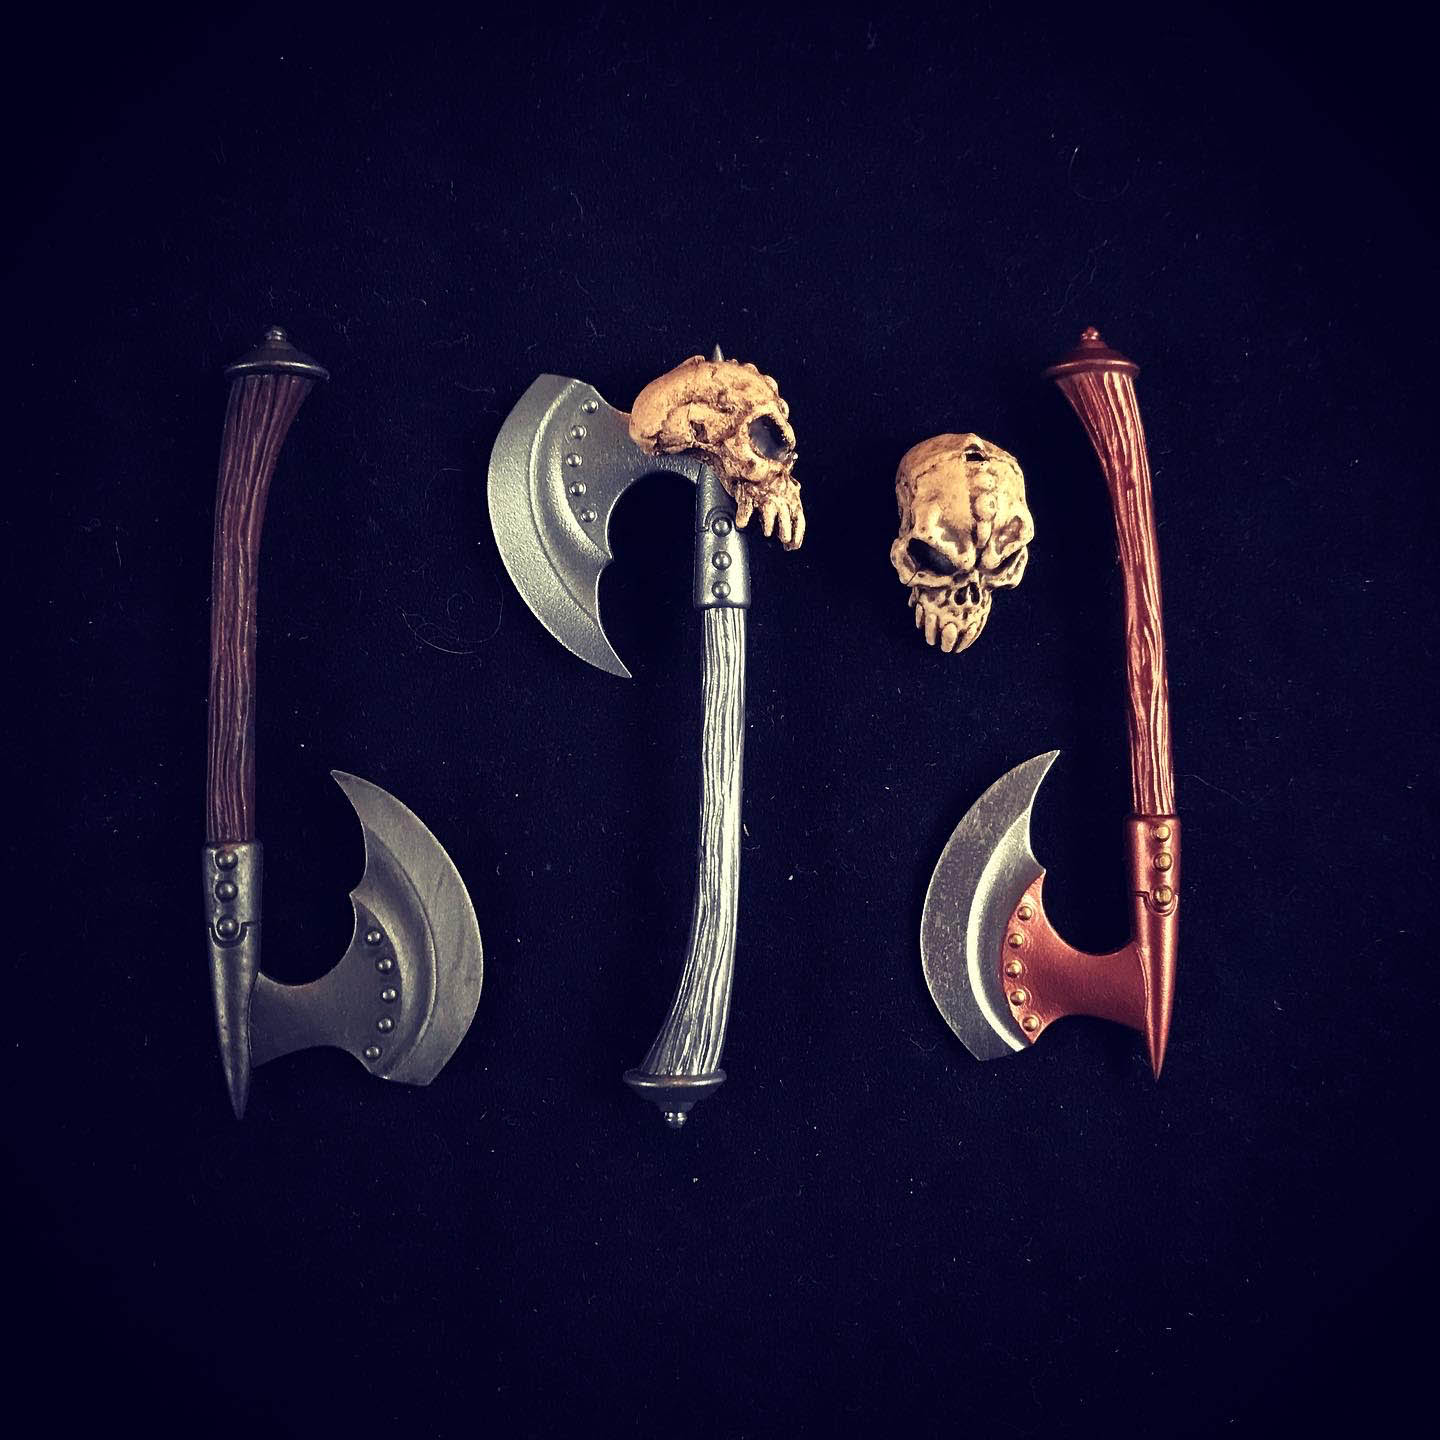 Skull-topped Axe Mythic Legions weapon